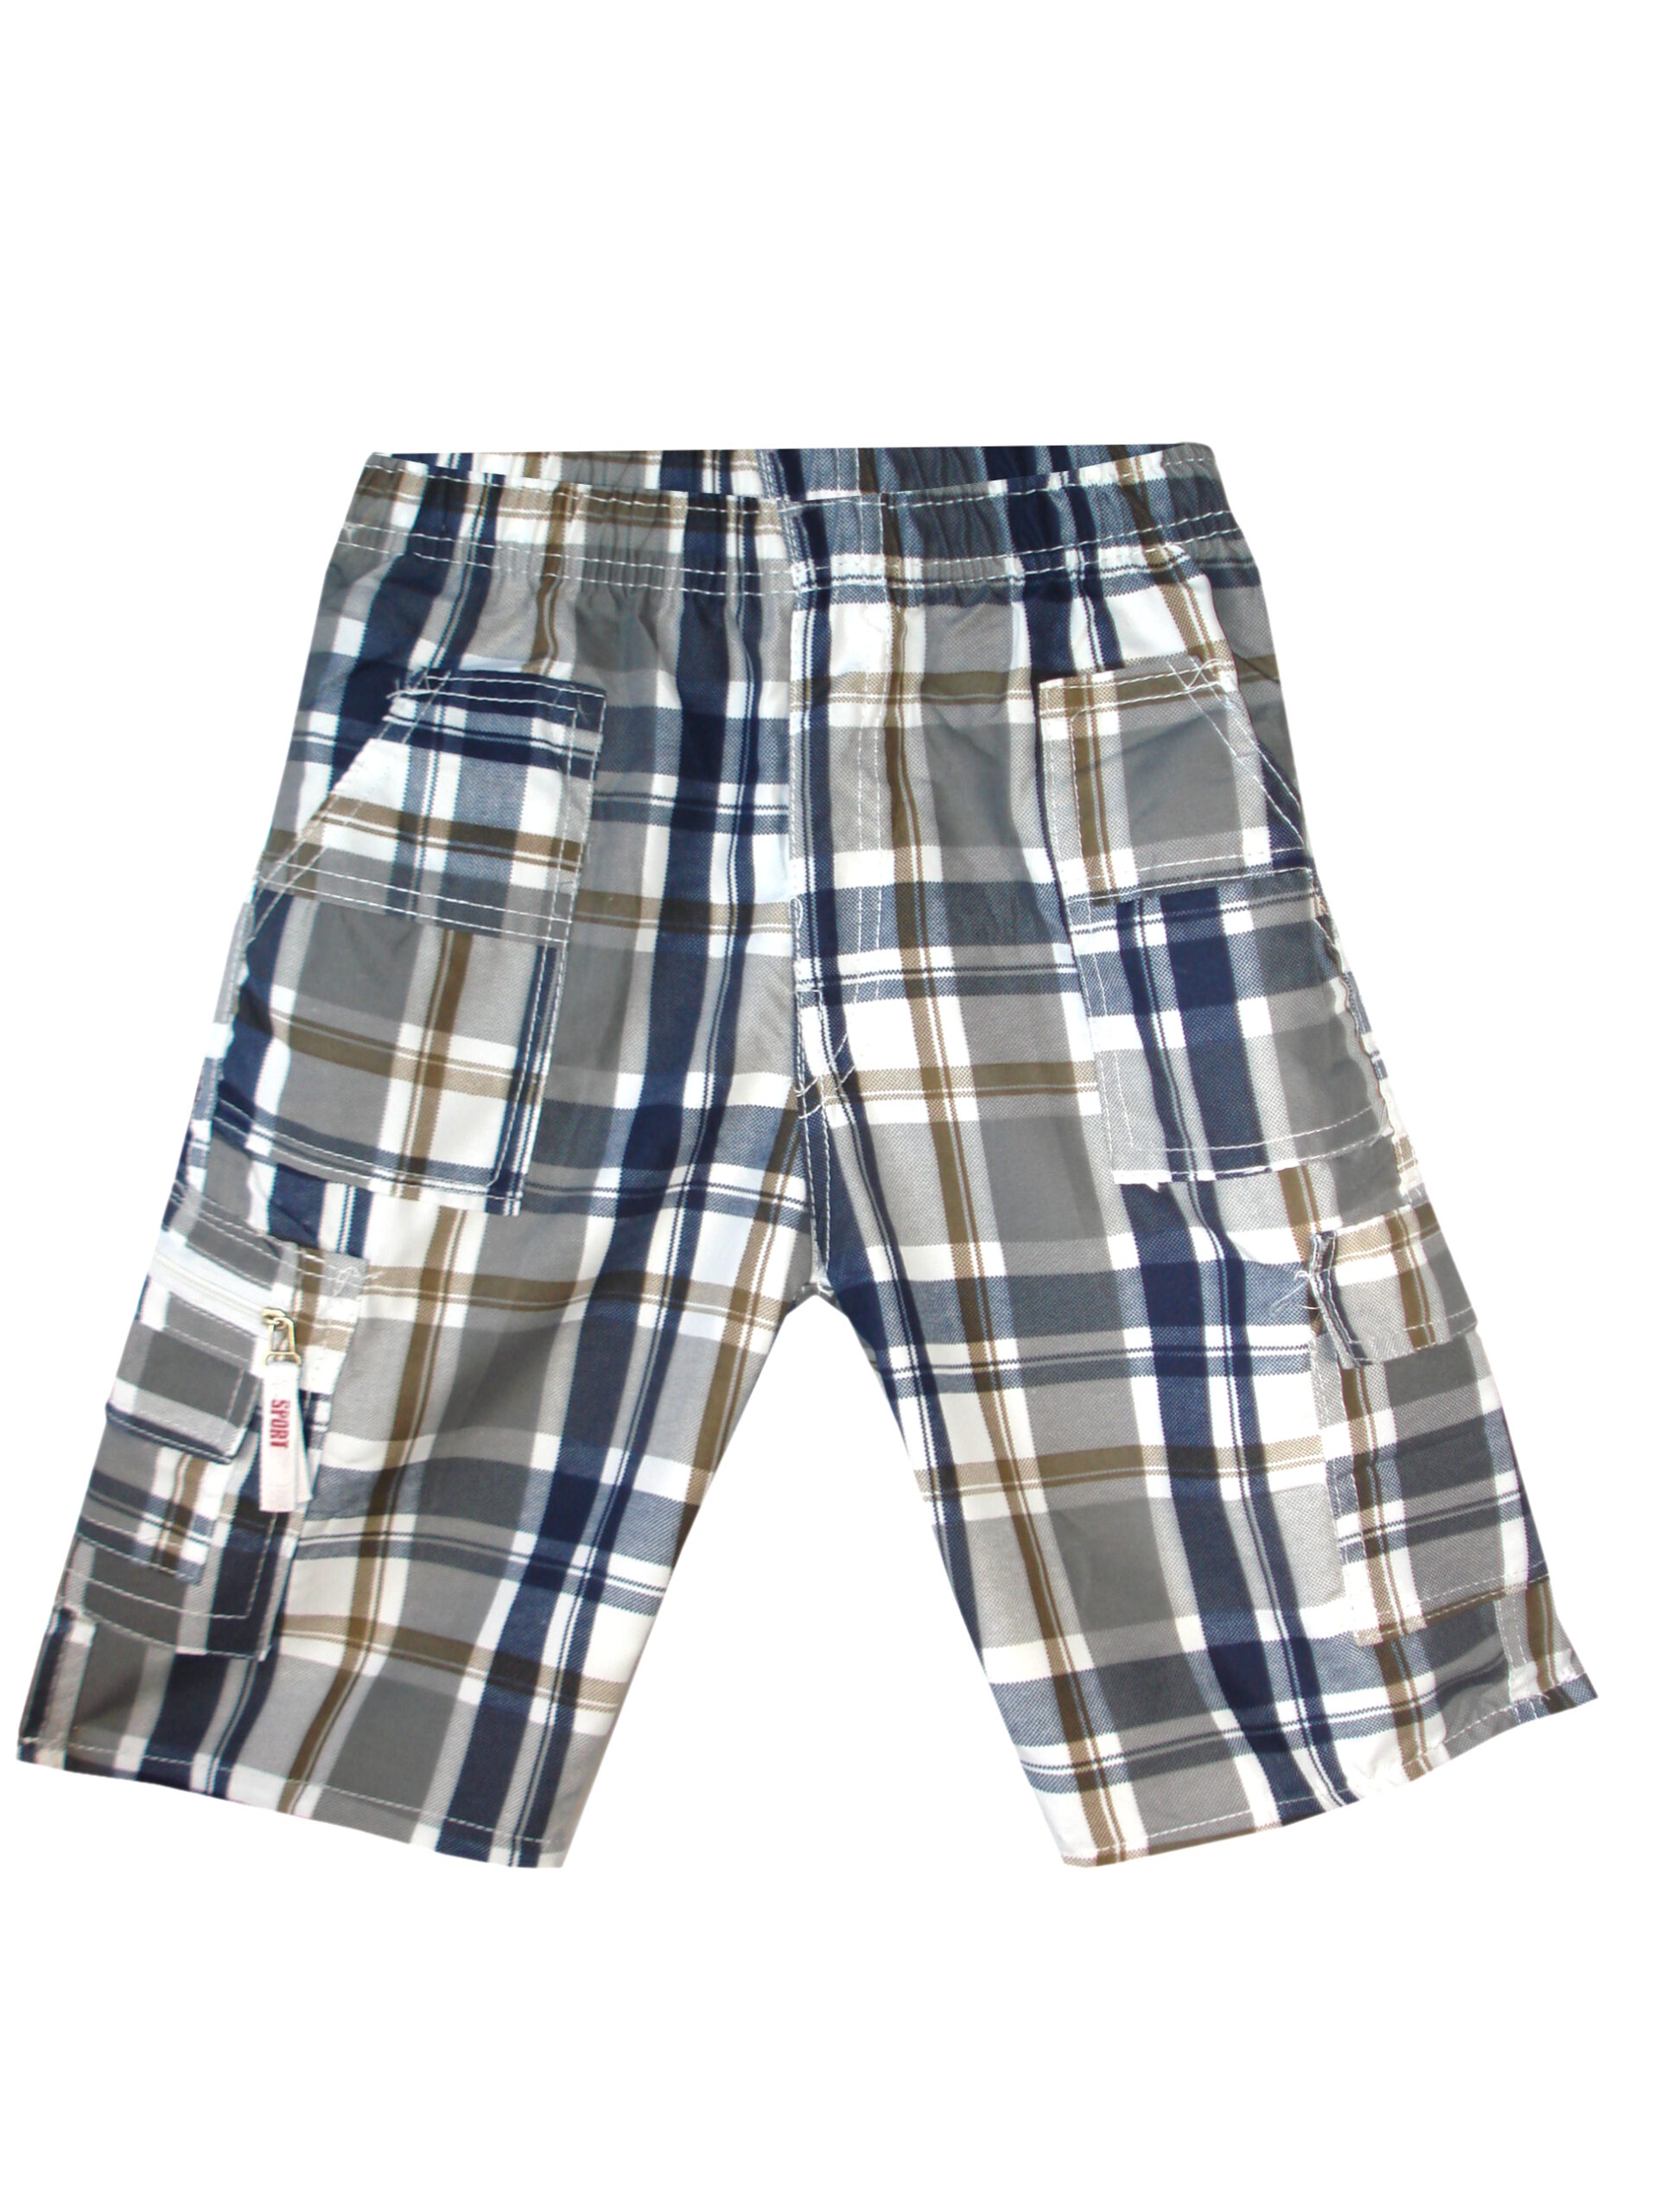 Boys Camouflage & Checked Shorts - Gum & Berries | Childrens Clothing ...